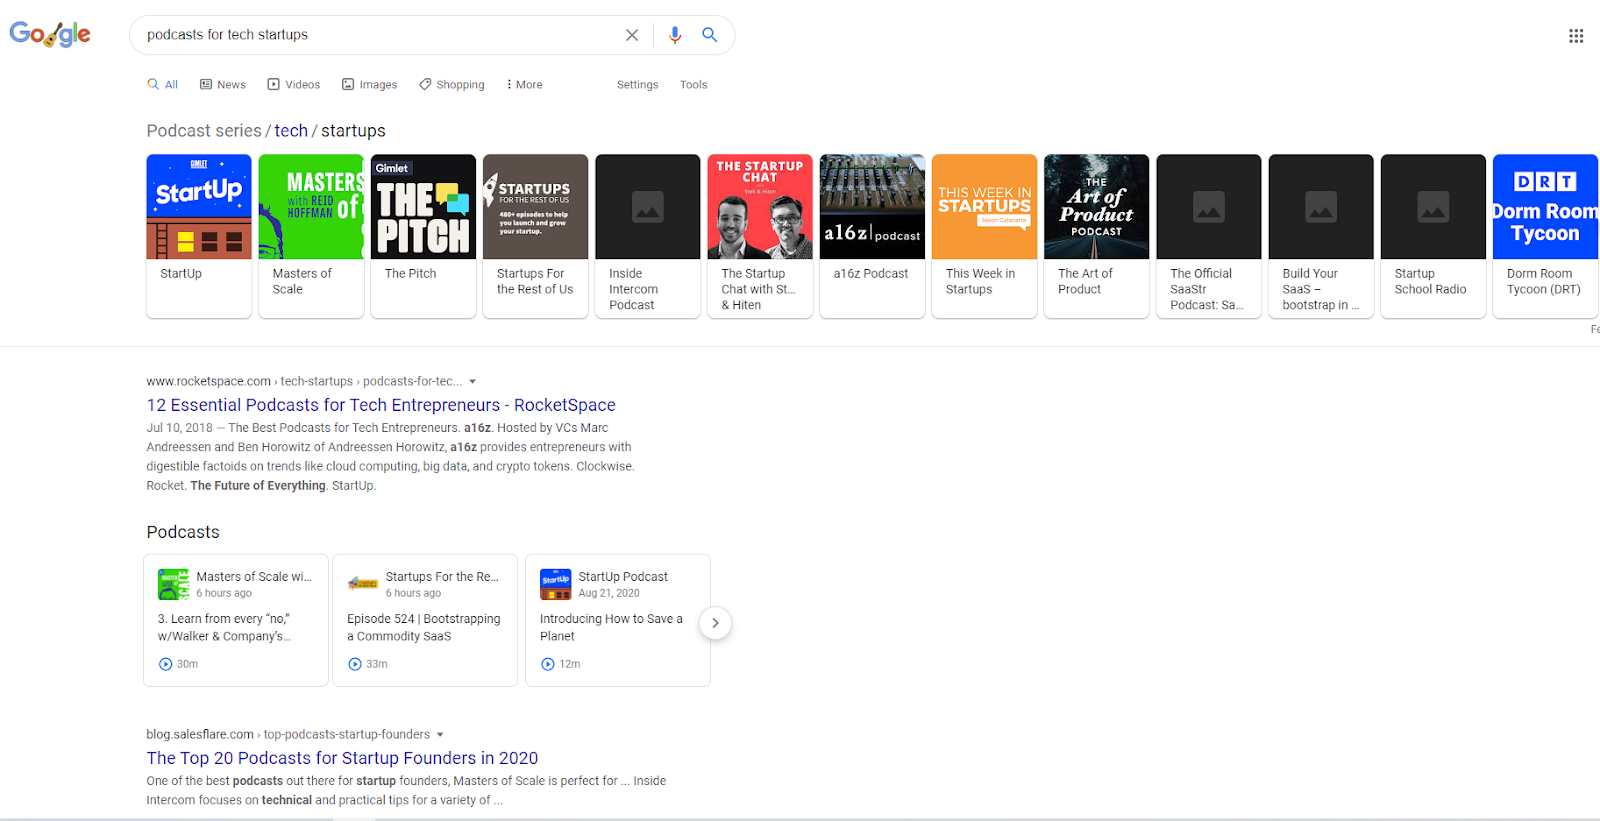 "Podcasts for tech startups" Google results page 1